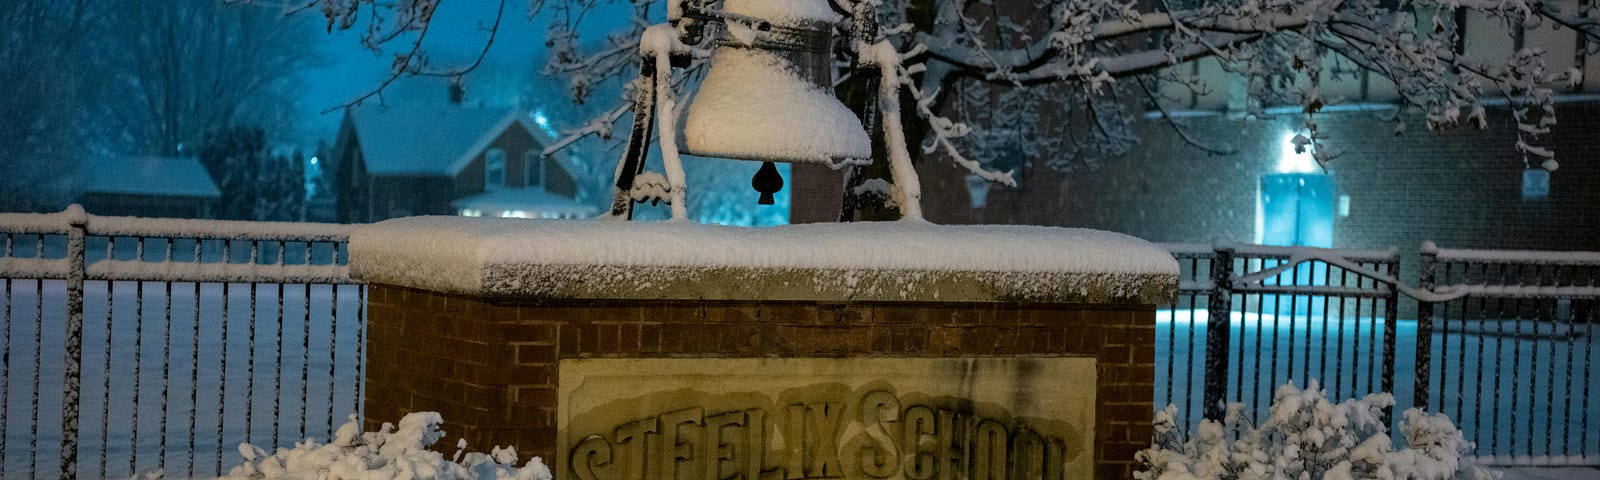 Image of a school bell covered in snow